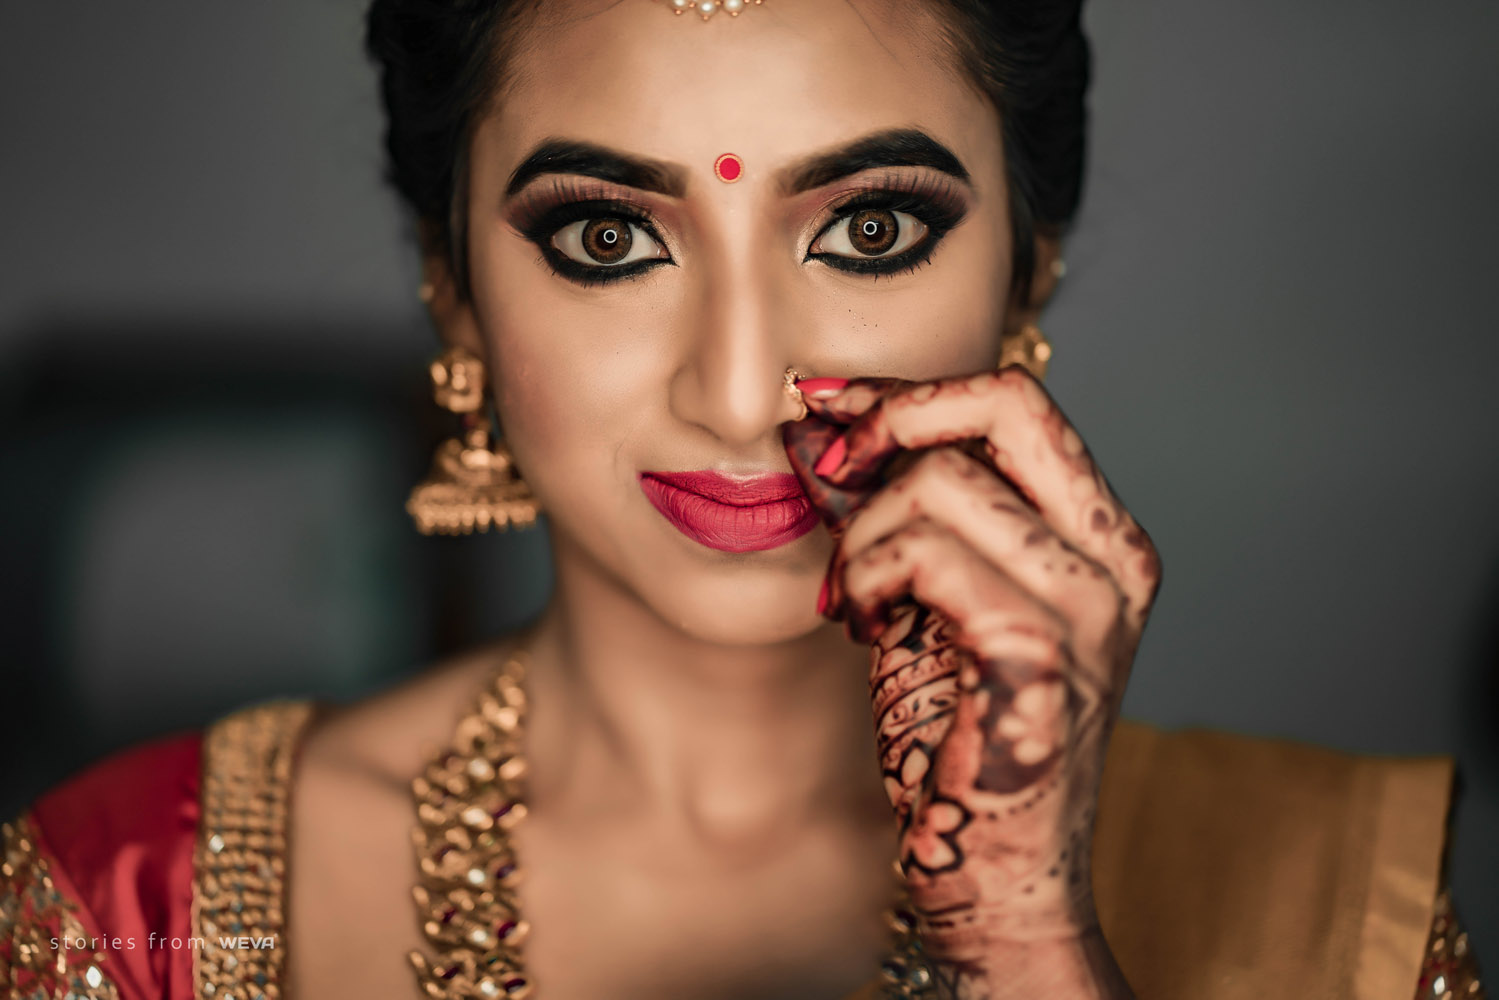 Crazy & Beautiful Poses That You Take Inspiration For Your Wedding Shoot